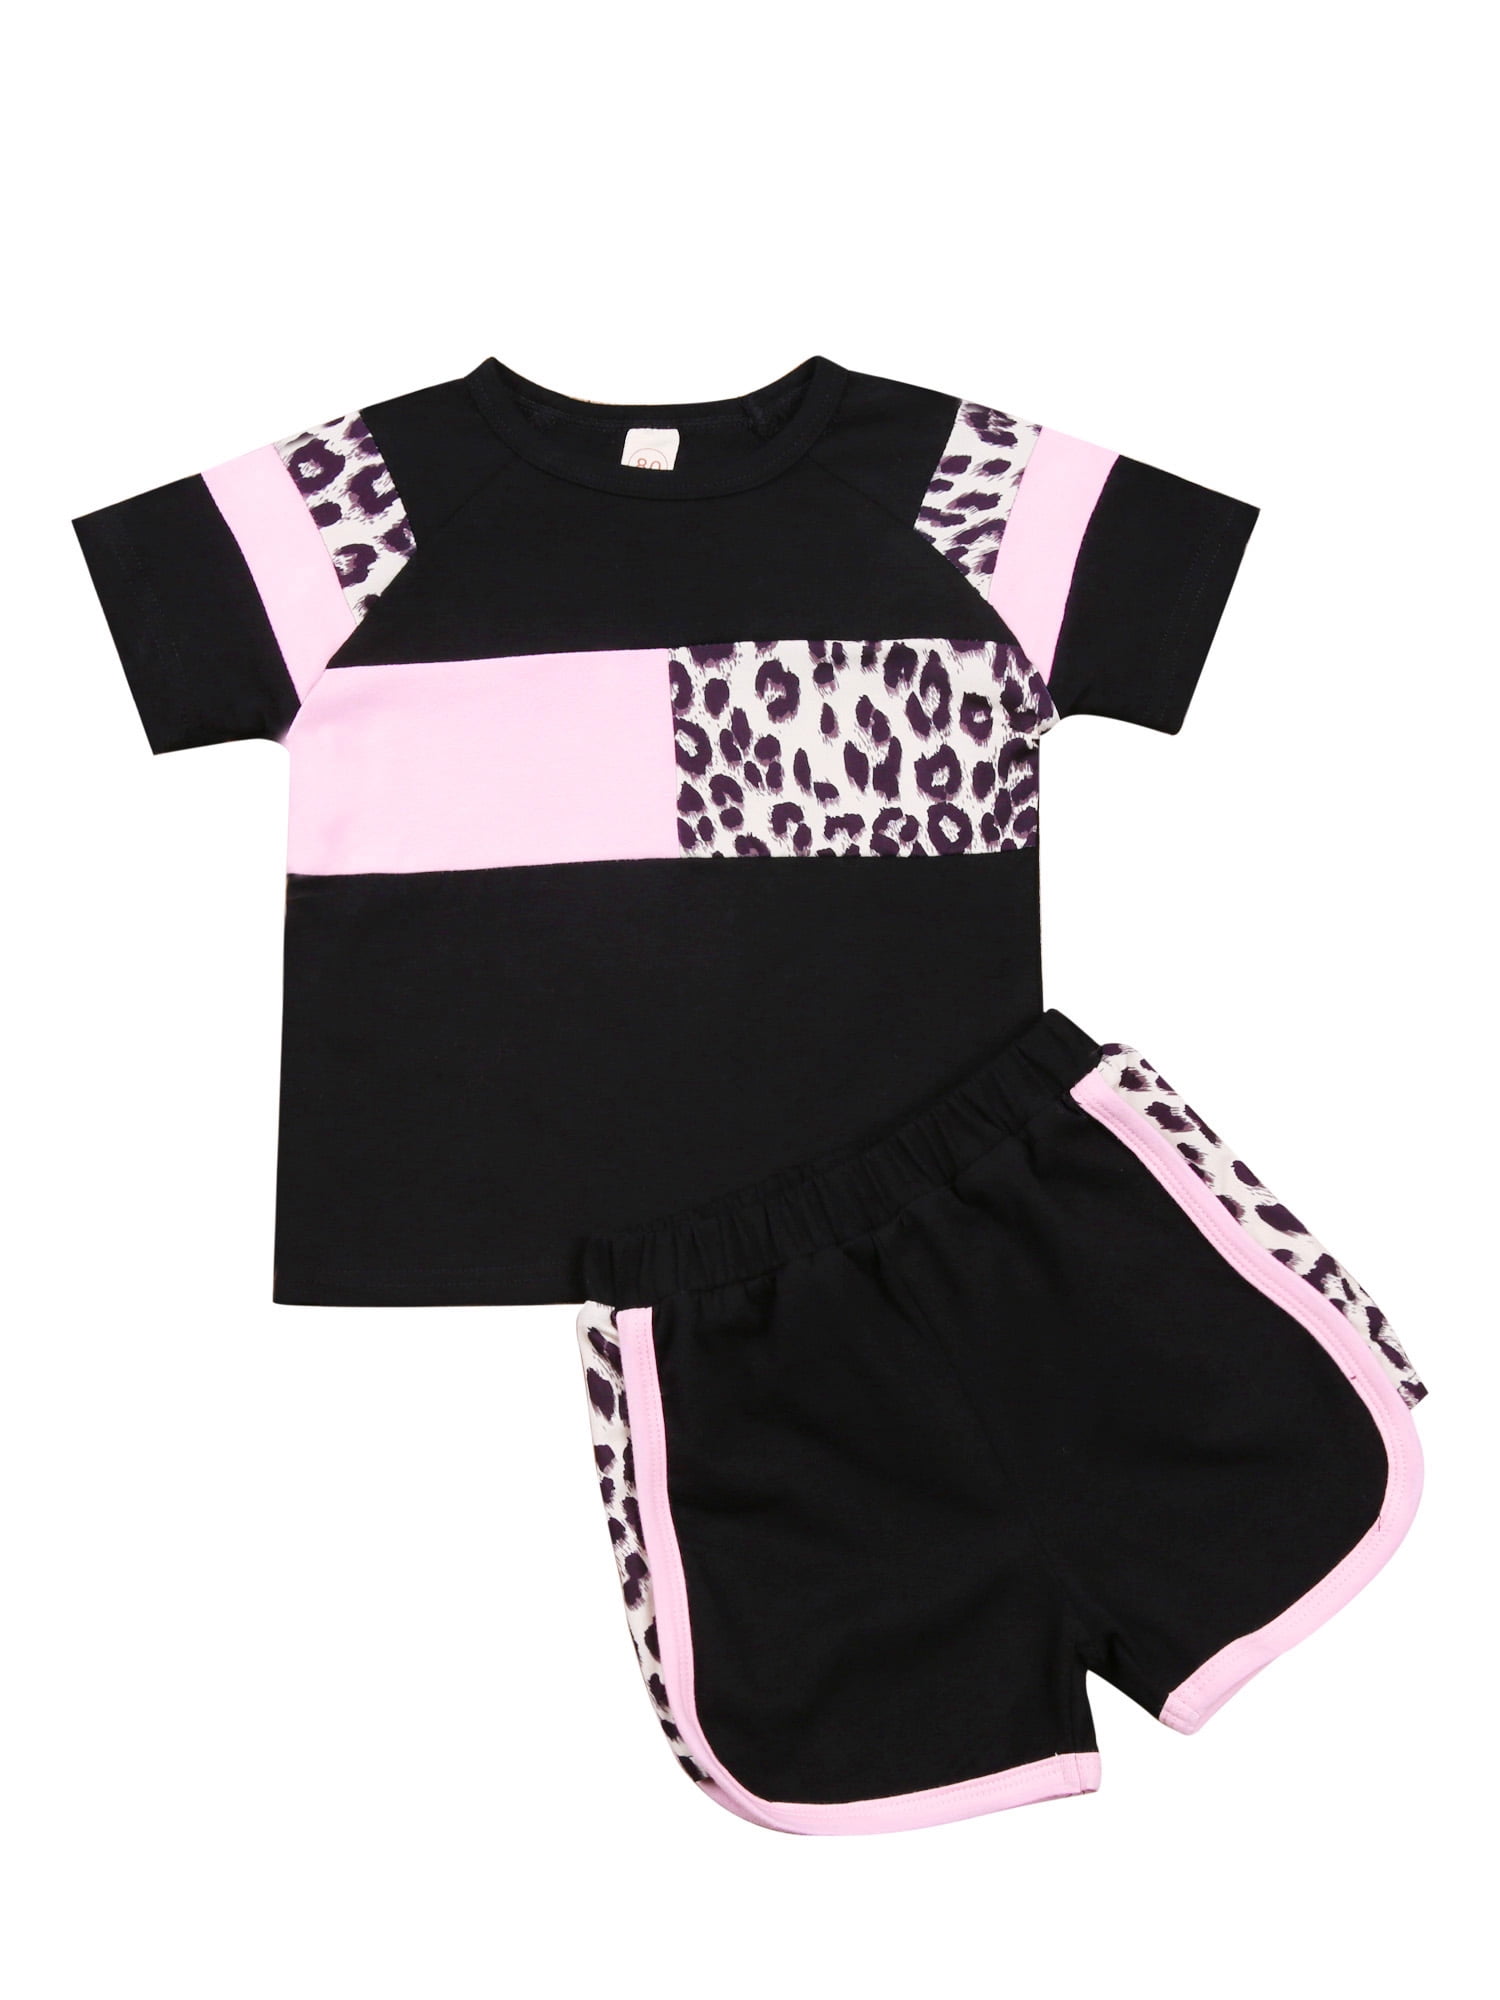 Details about   Toddler Kids Baby Girls Outfits Short Sleeve T-Shirt Tops Pants Casual Tracksuit 